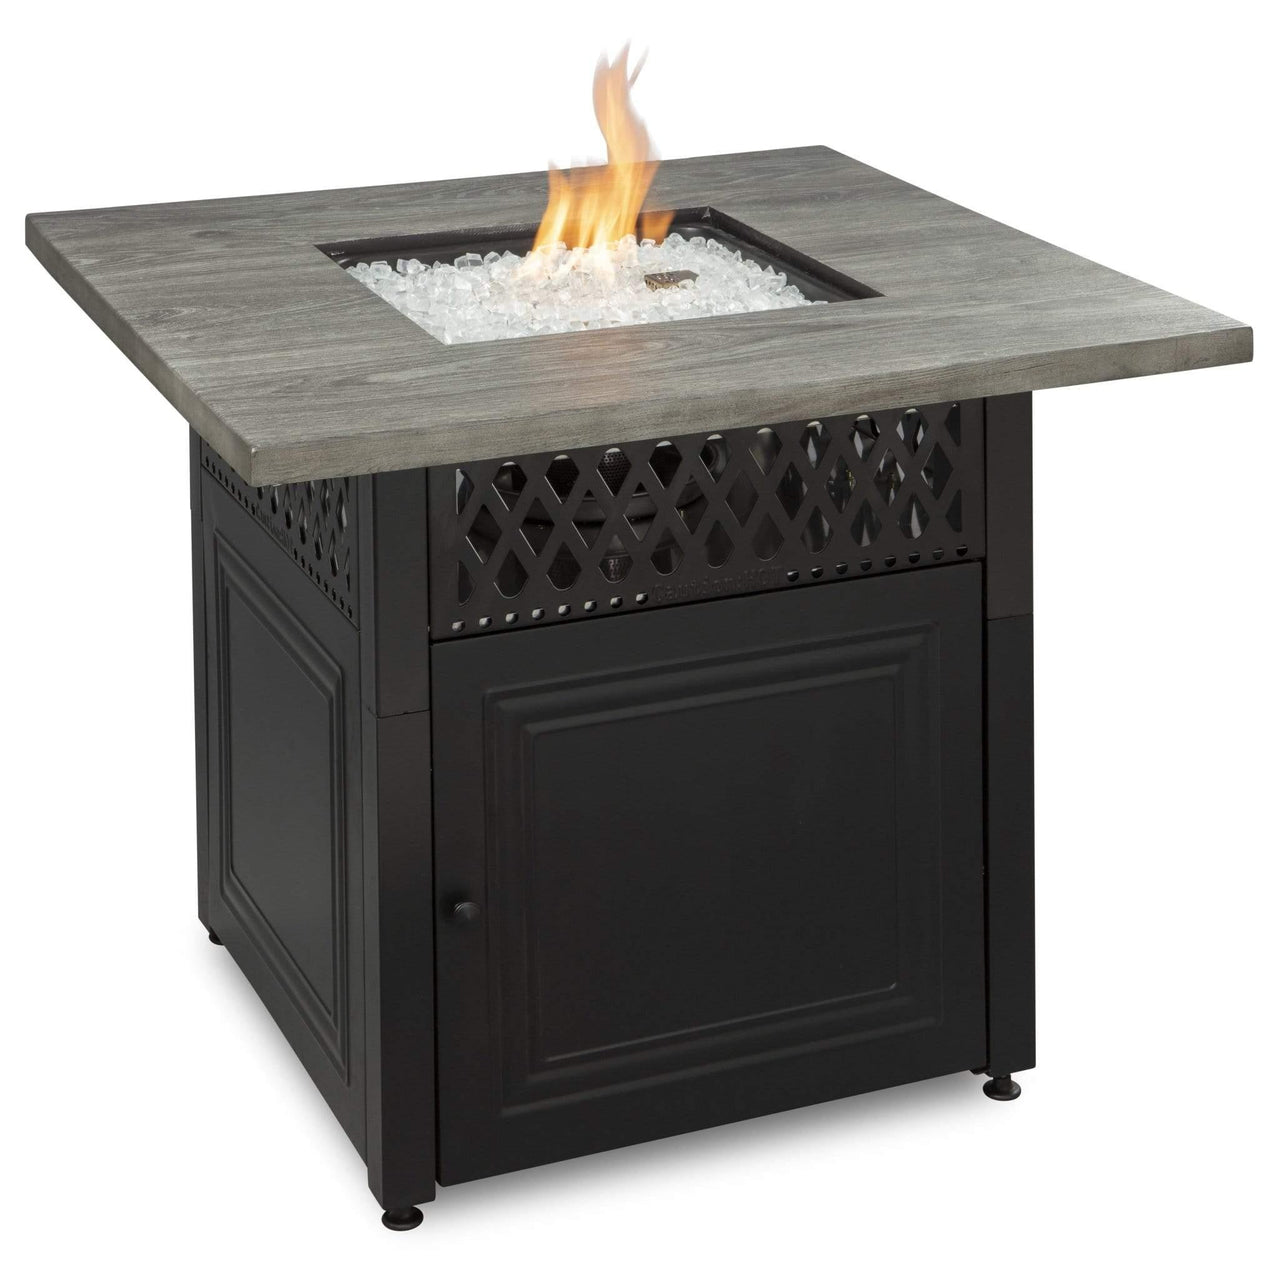 Endless Summer The Dakota, Dual Heat LP Gas Outdoor Fire Pit/Patio Heater with Wood Look Resin Mantel - GAD19101ES - Fire Pit Stock